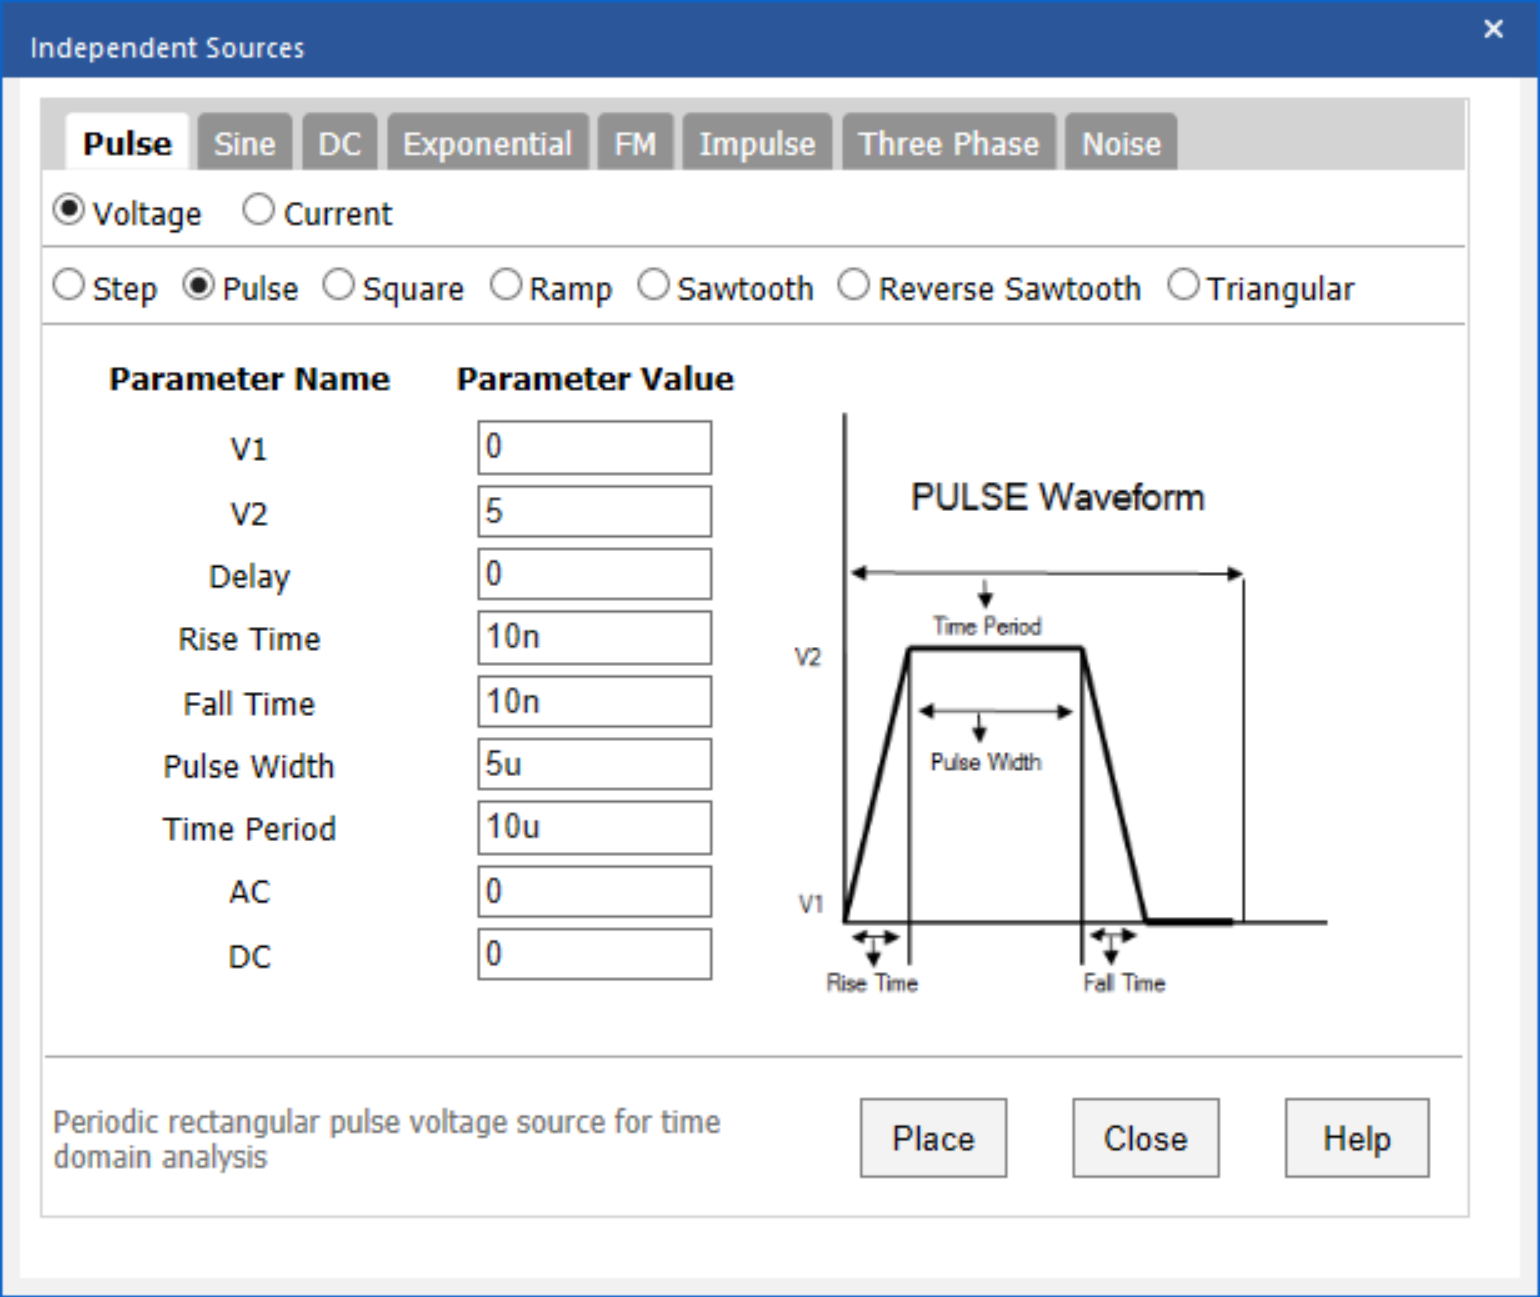 Pulse Source SPICE Model Creation with the Modeling Application in PSpice